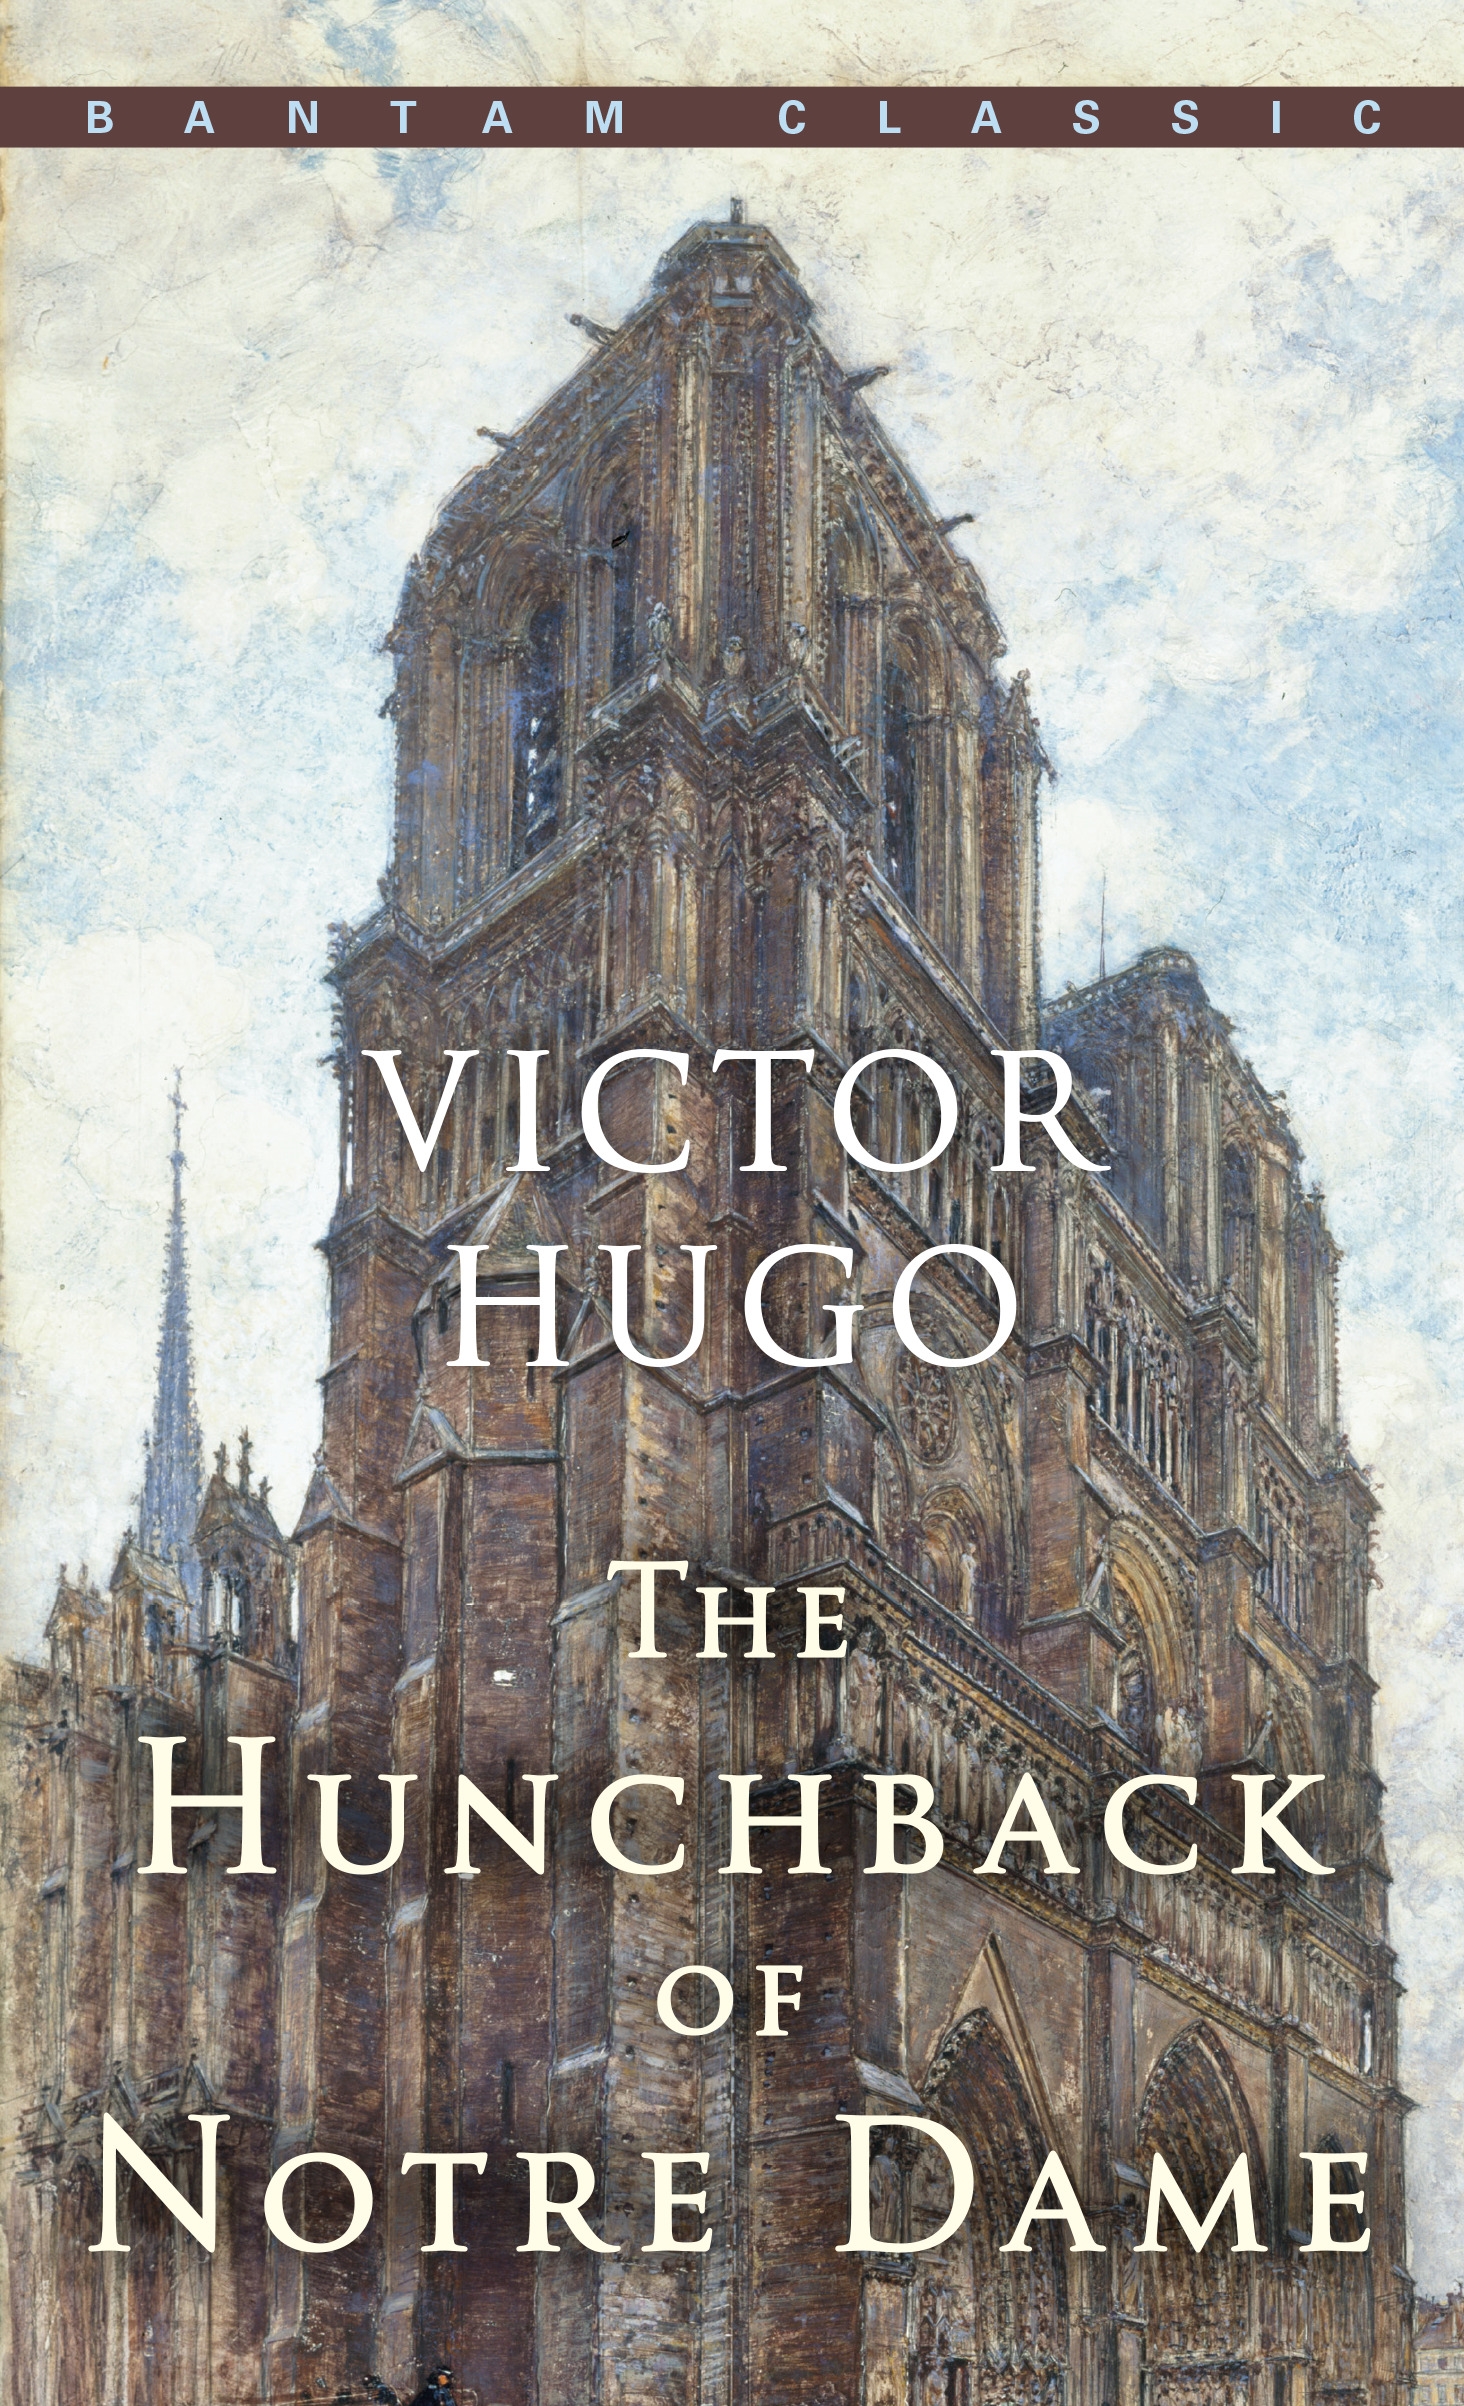 book review of the hunchback of notre dame